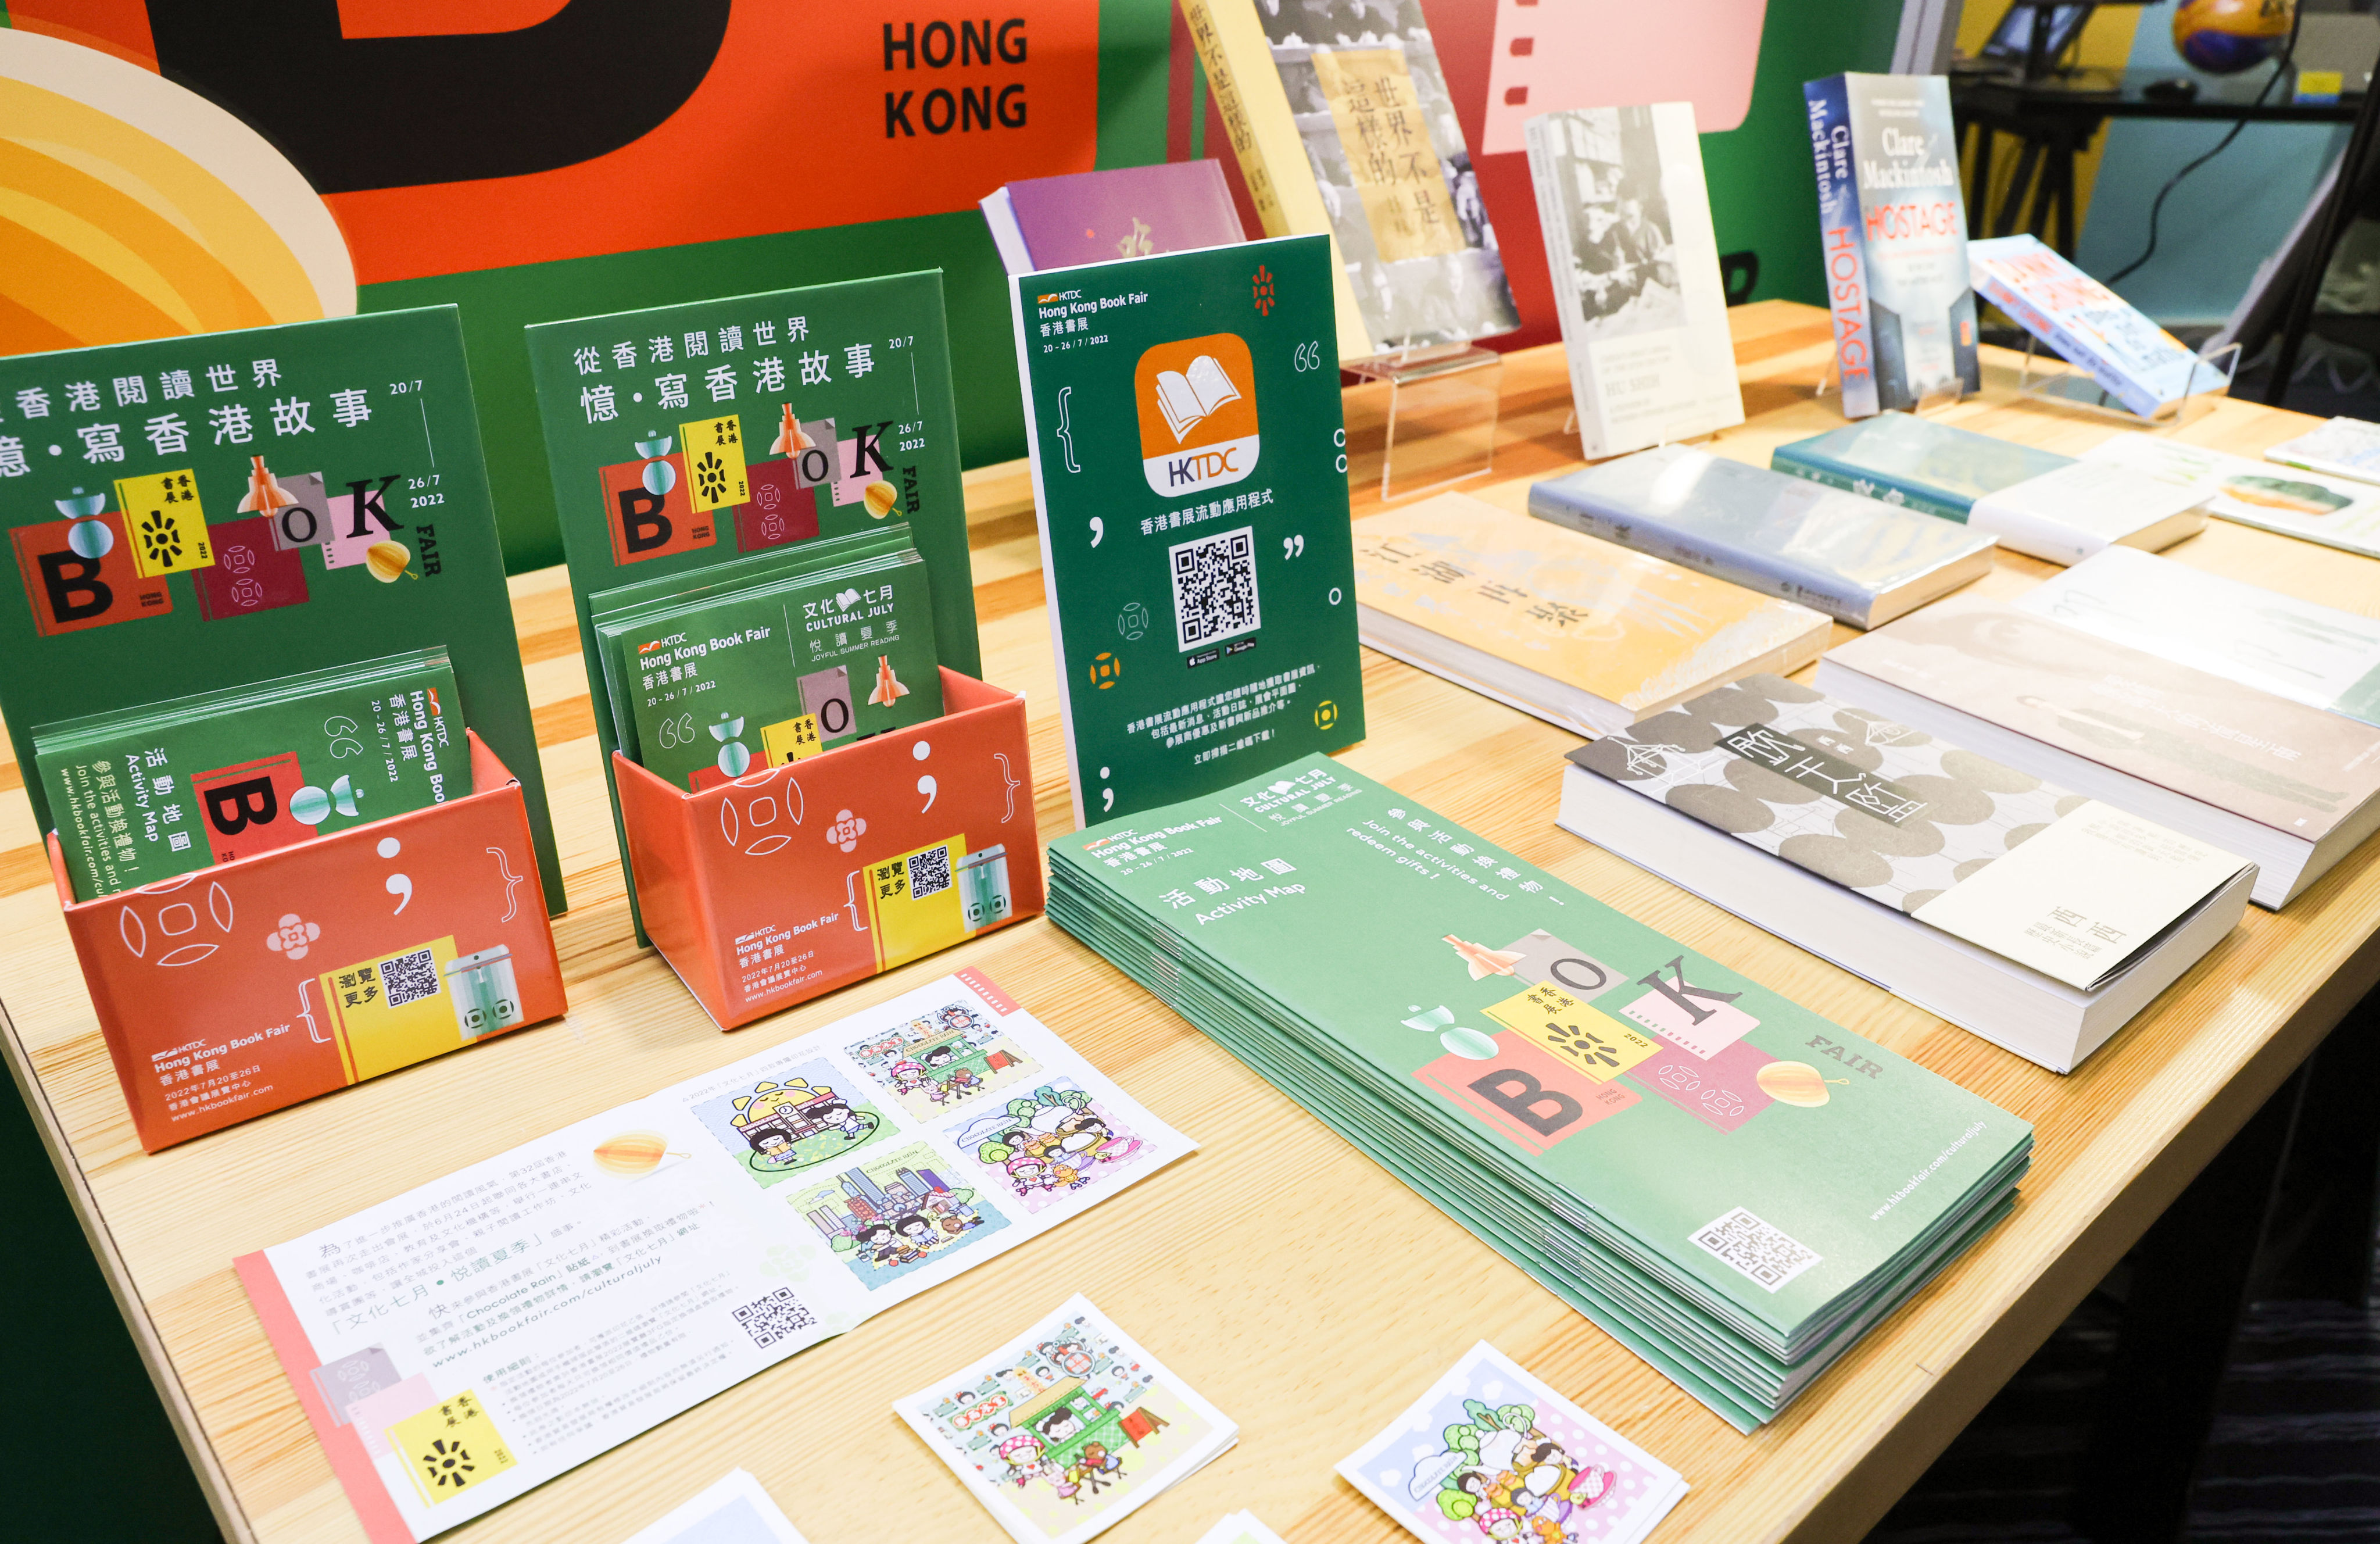 Books displayed at a press conference on the Hong Kong Book Fair. Photo: Edmond So